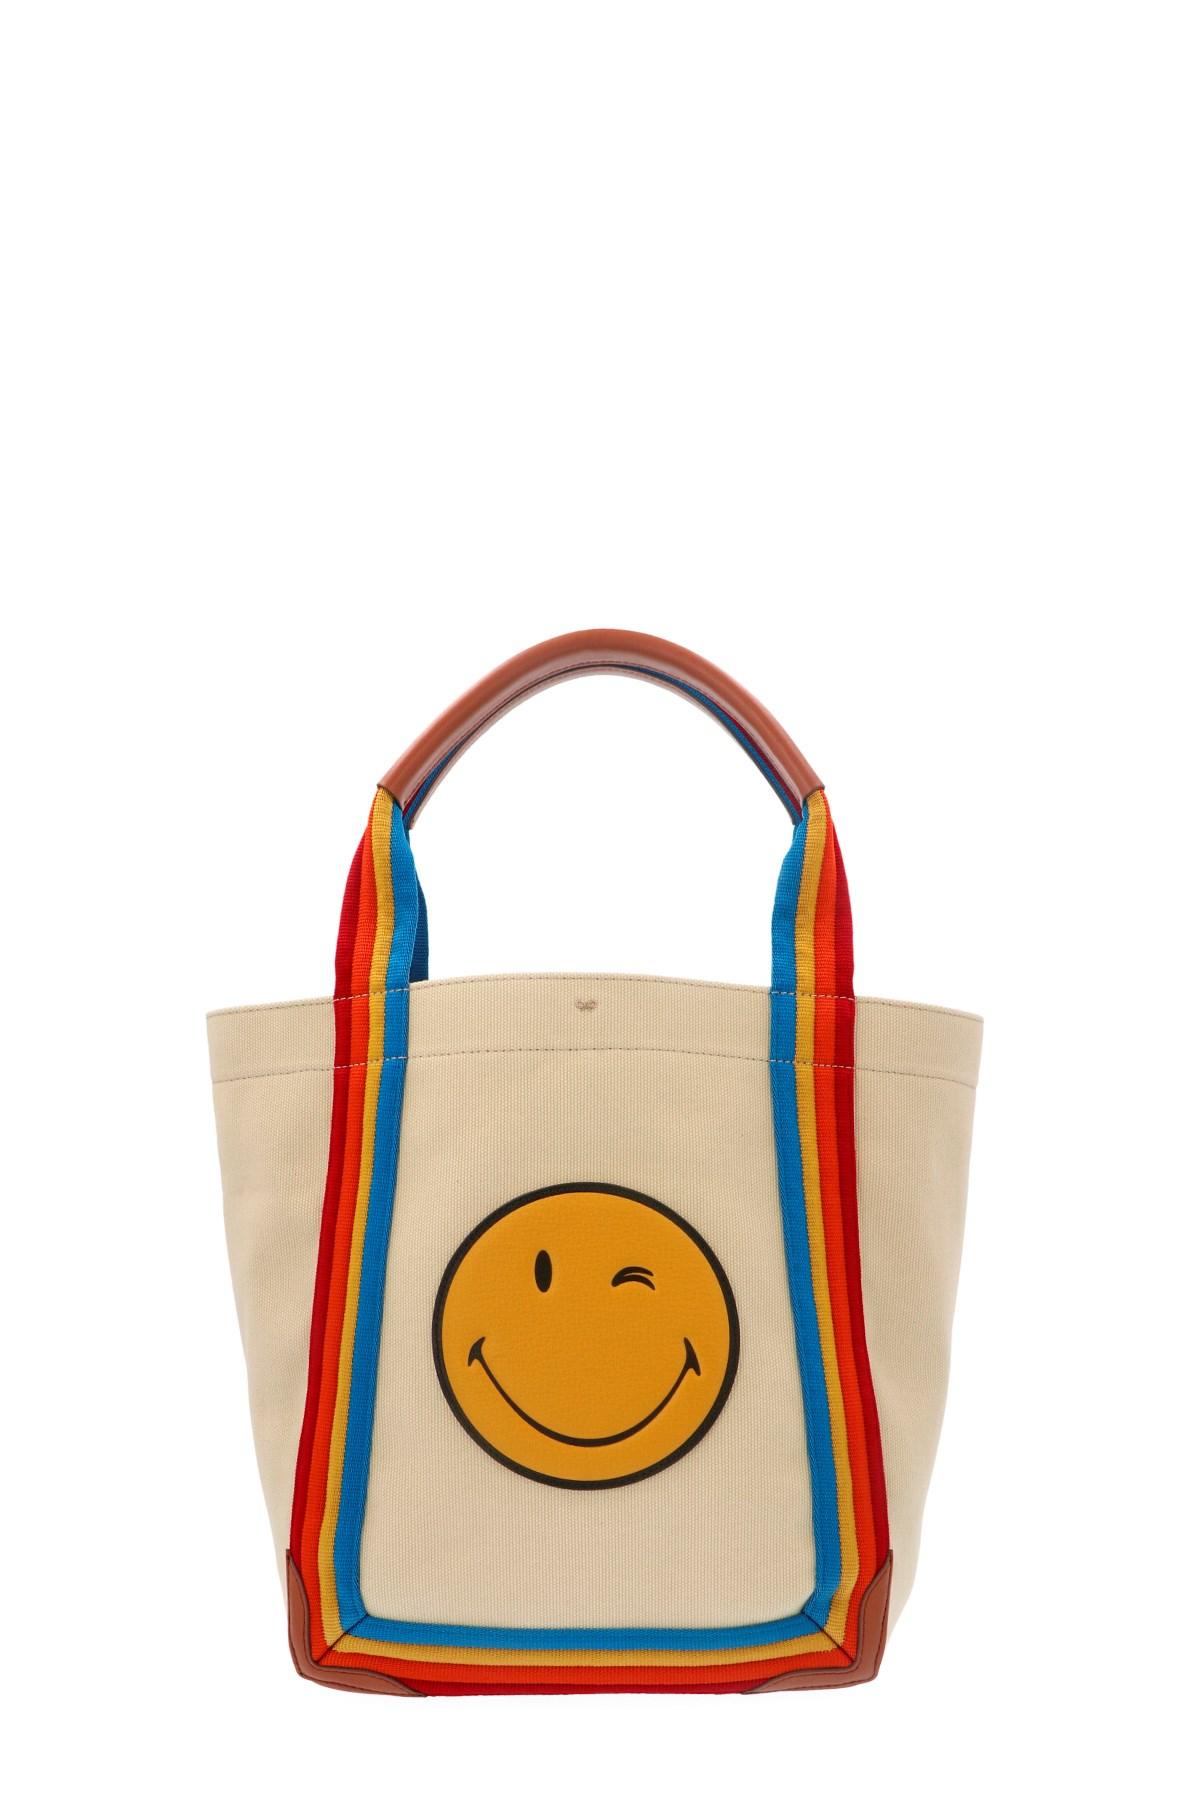 Anya Hindmarch Canvas Wink Tote Bag in Beige (Natural) | Lyst